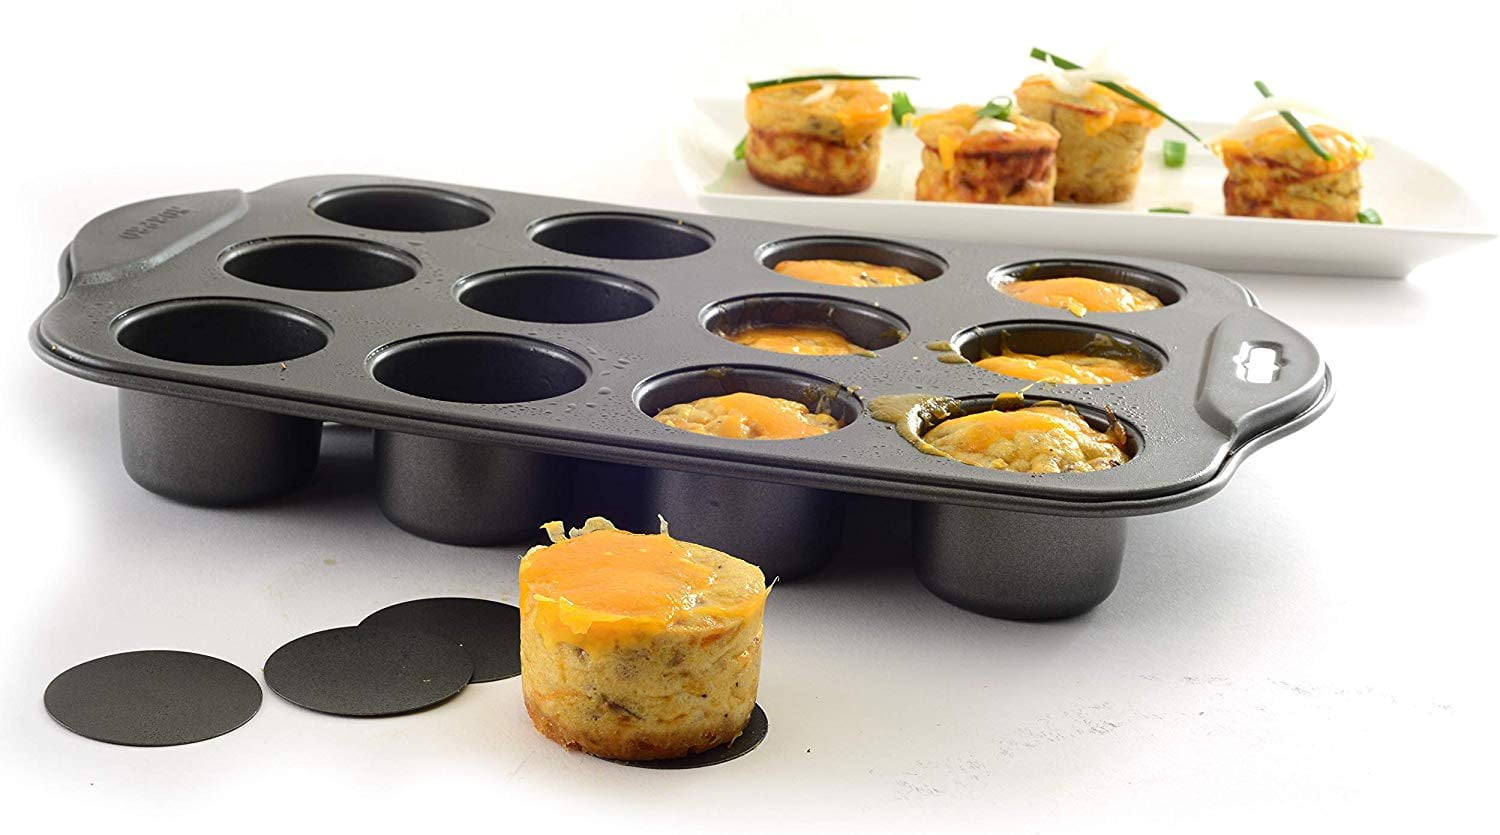 Norpro Nonstick Mini Cheesecake Pan 12 Cup - The Peppermill